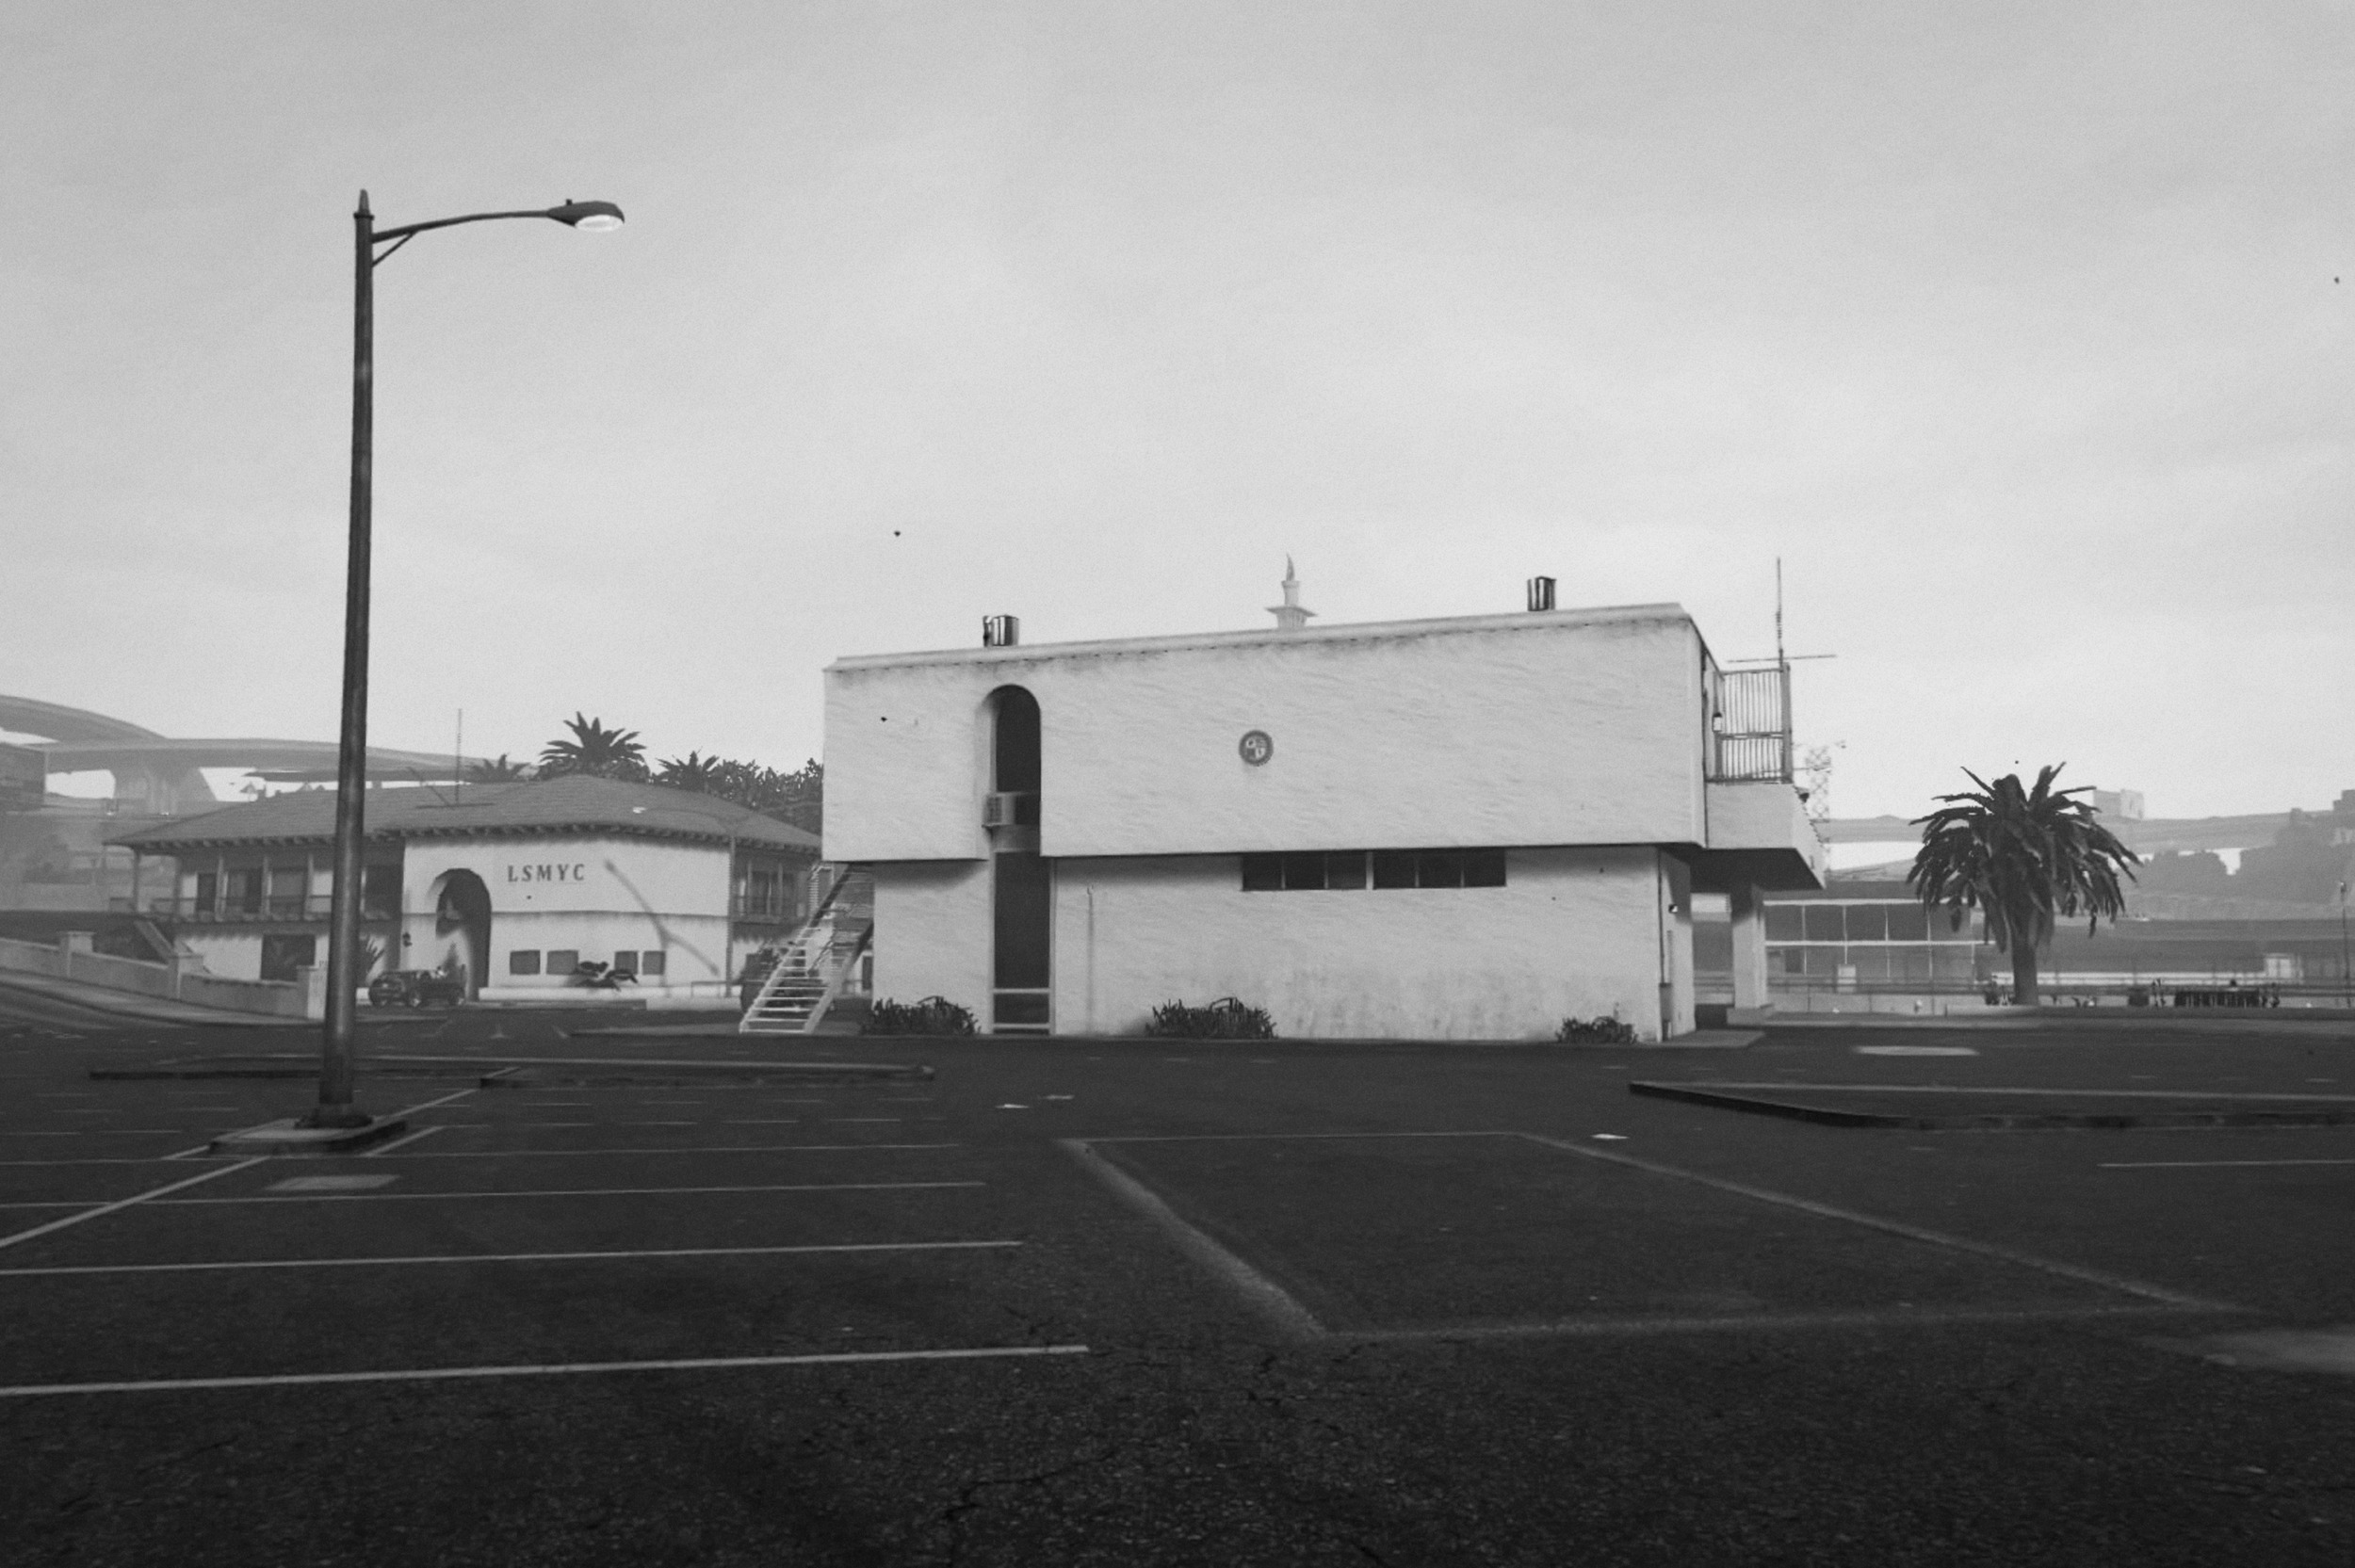 A black-and-white landscape "photograph" of a non-descript, oncrete-heavy building. The second floor makes it look slightly mushroom-shaped. In the front, big parking lot, a street lamp. In the background palm trees and a building that says LSMYC. If you look close enough you realize that this is not a photograph, but a screengrab. 